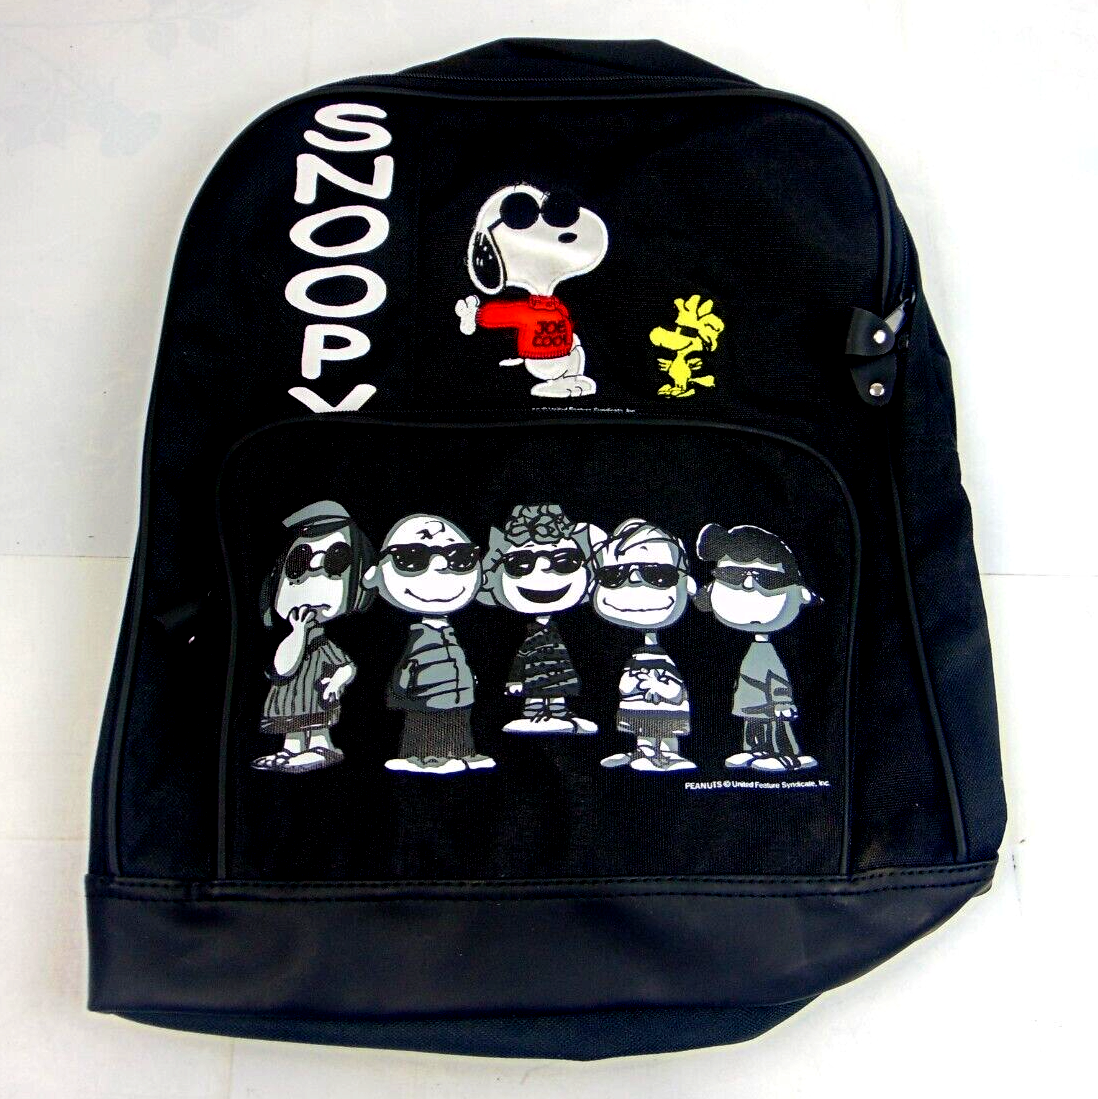 Vintage Peanuts Snoopy And The Gang Black Backpack Nwt - $198.00